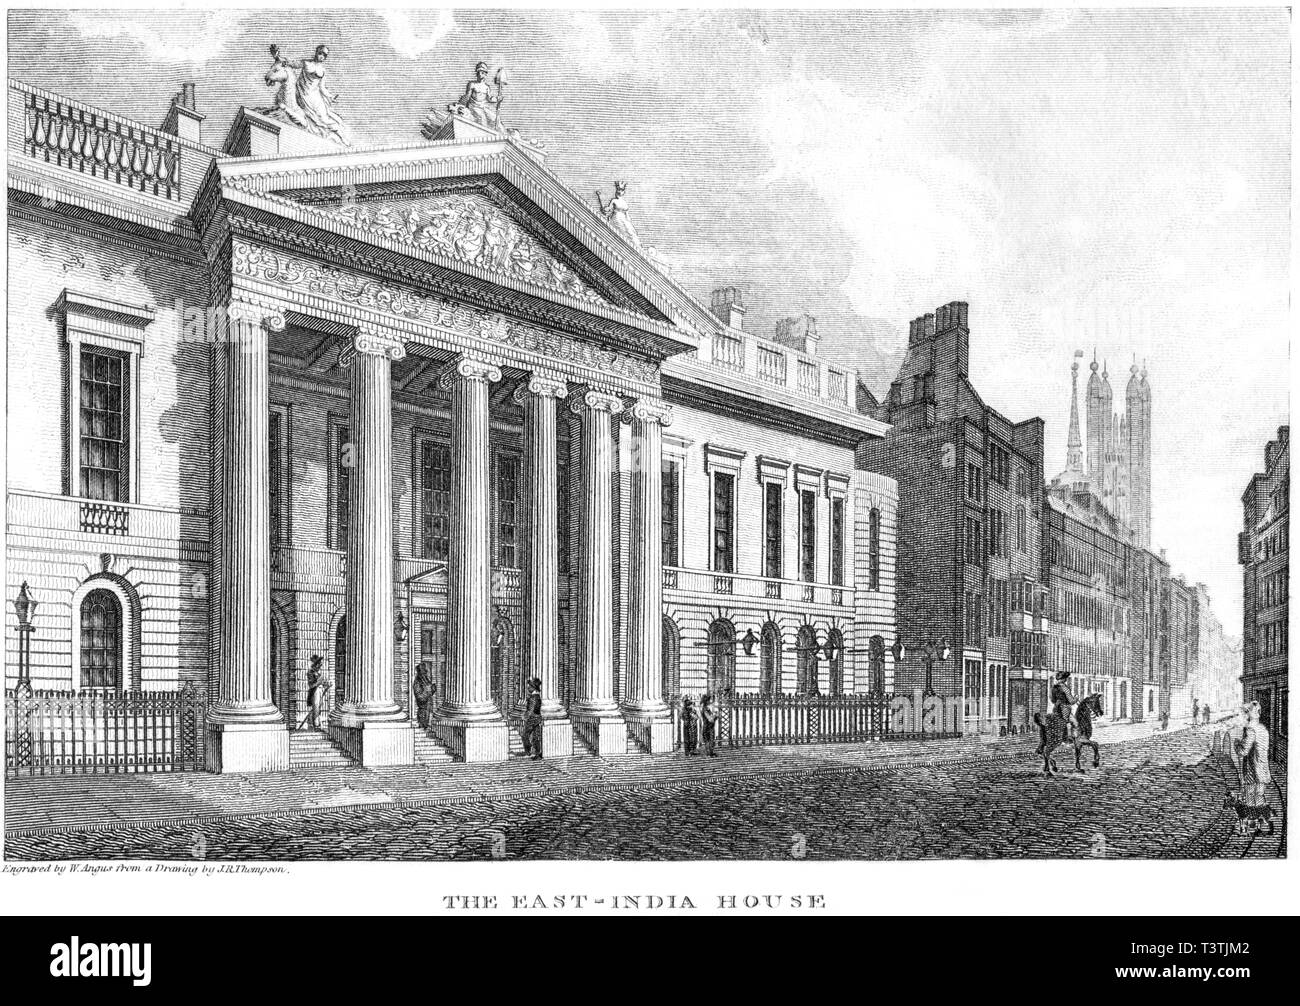 An engraving of The East India House, London UK scanned at high resolution from a book published in 1814. Believed copyright free. Stock Photo